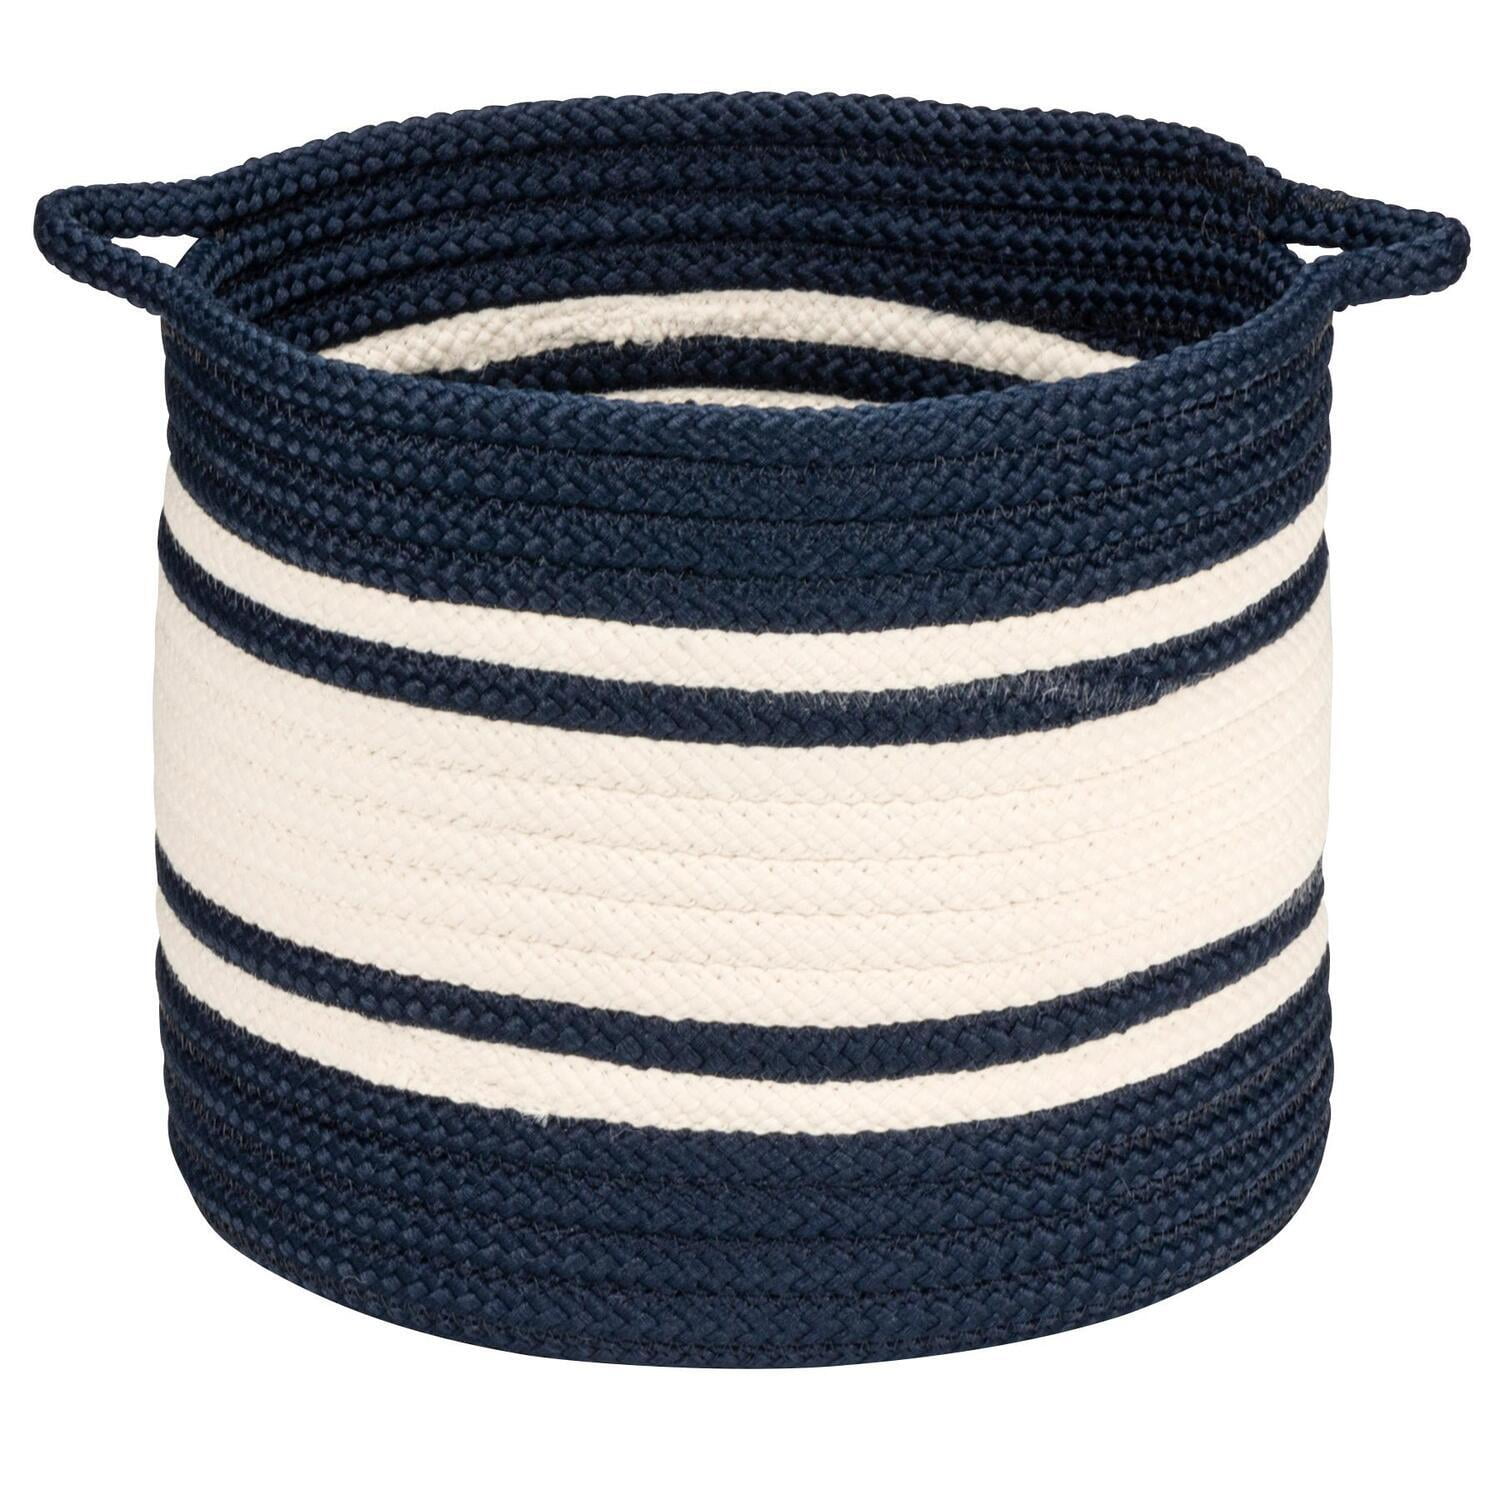 Colonia Mills Bs73 Outland Basket, Navy - 20 X 20 X 18 In.